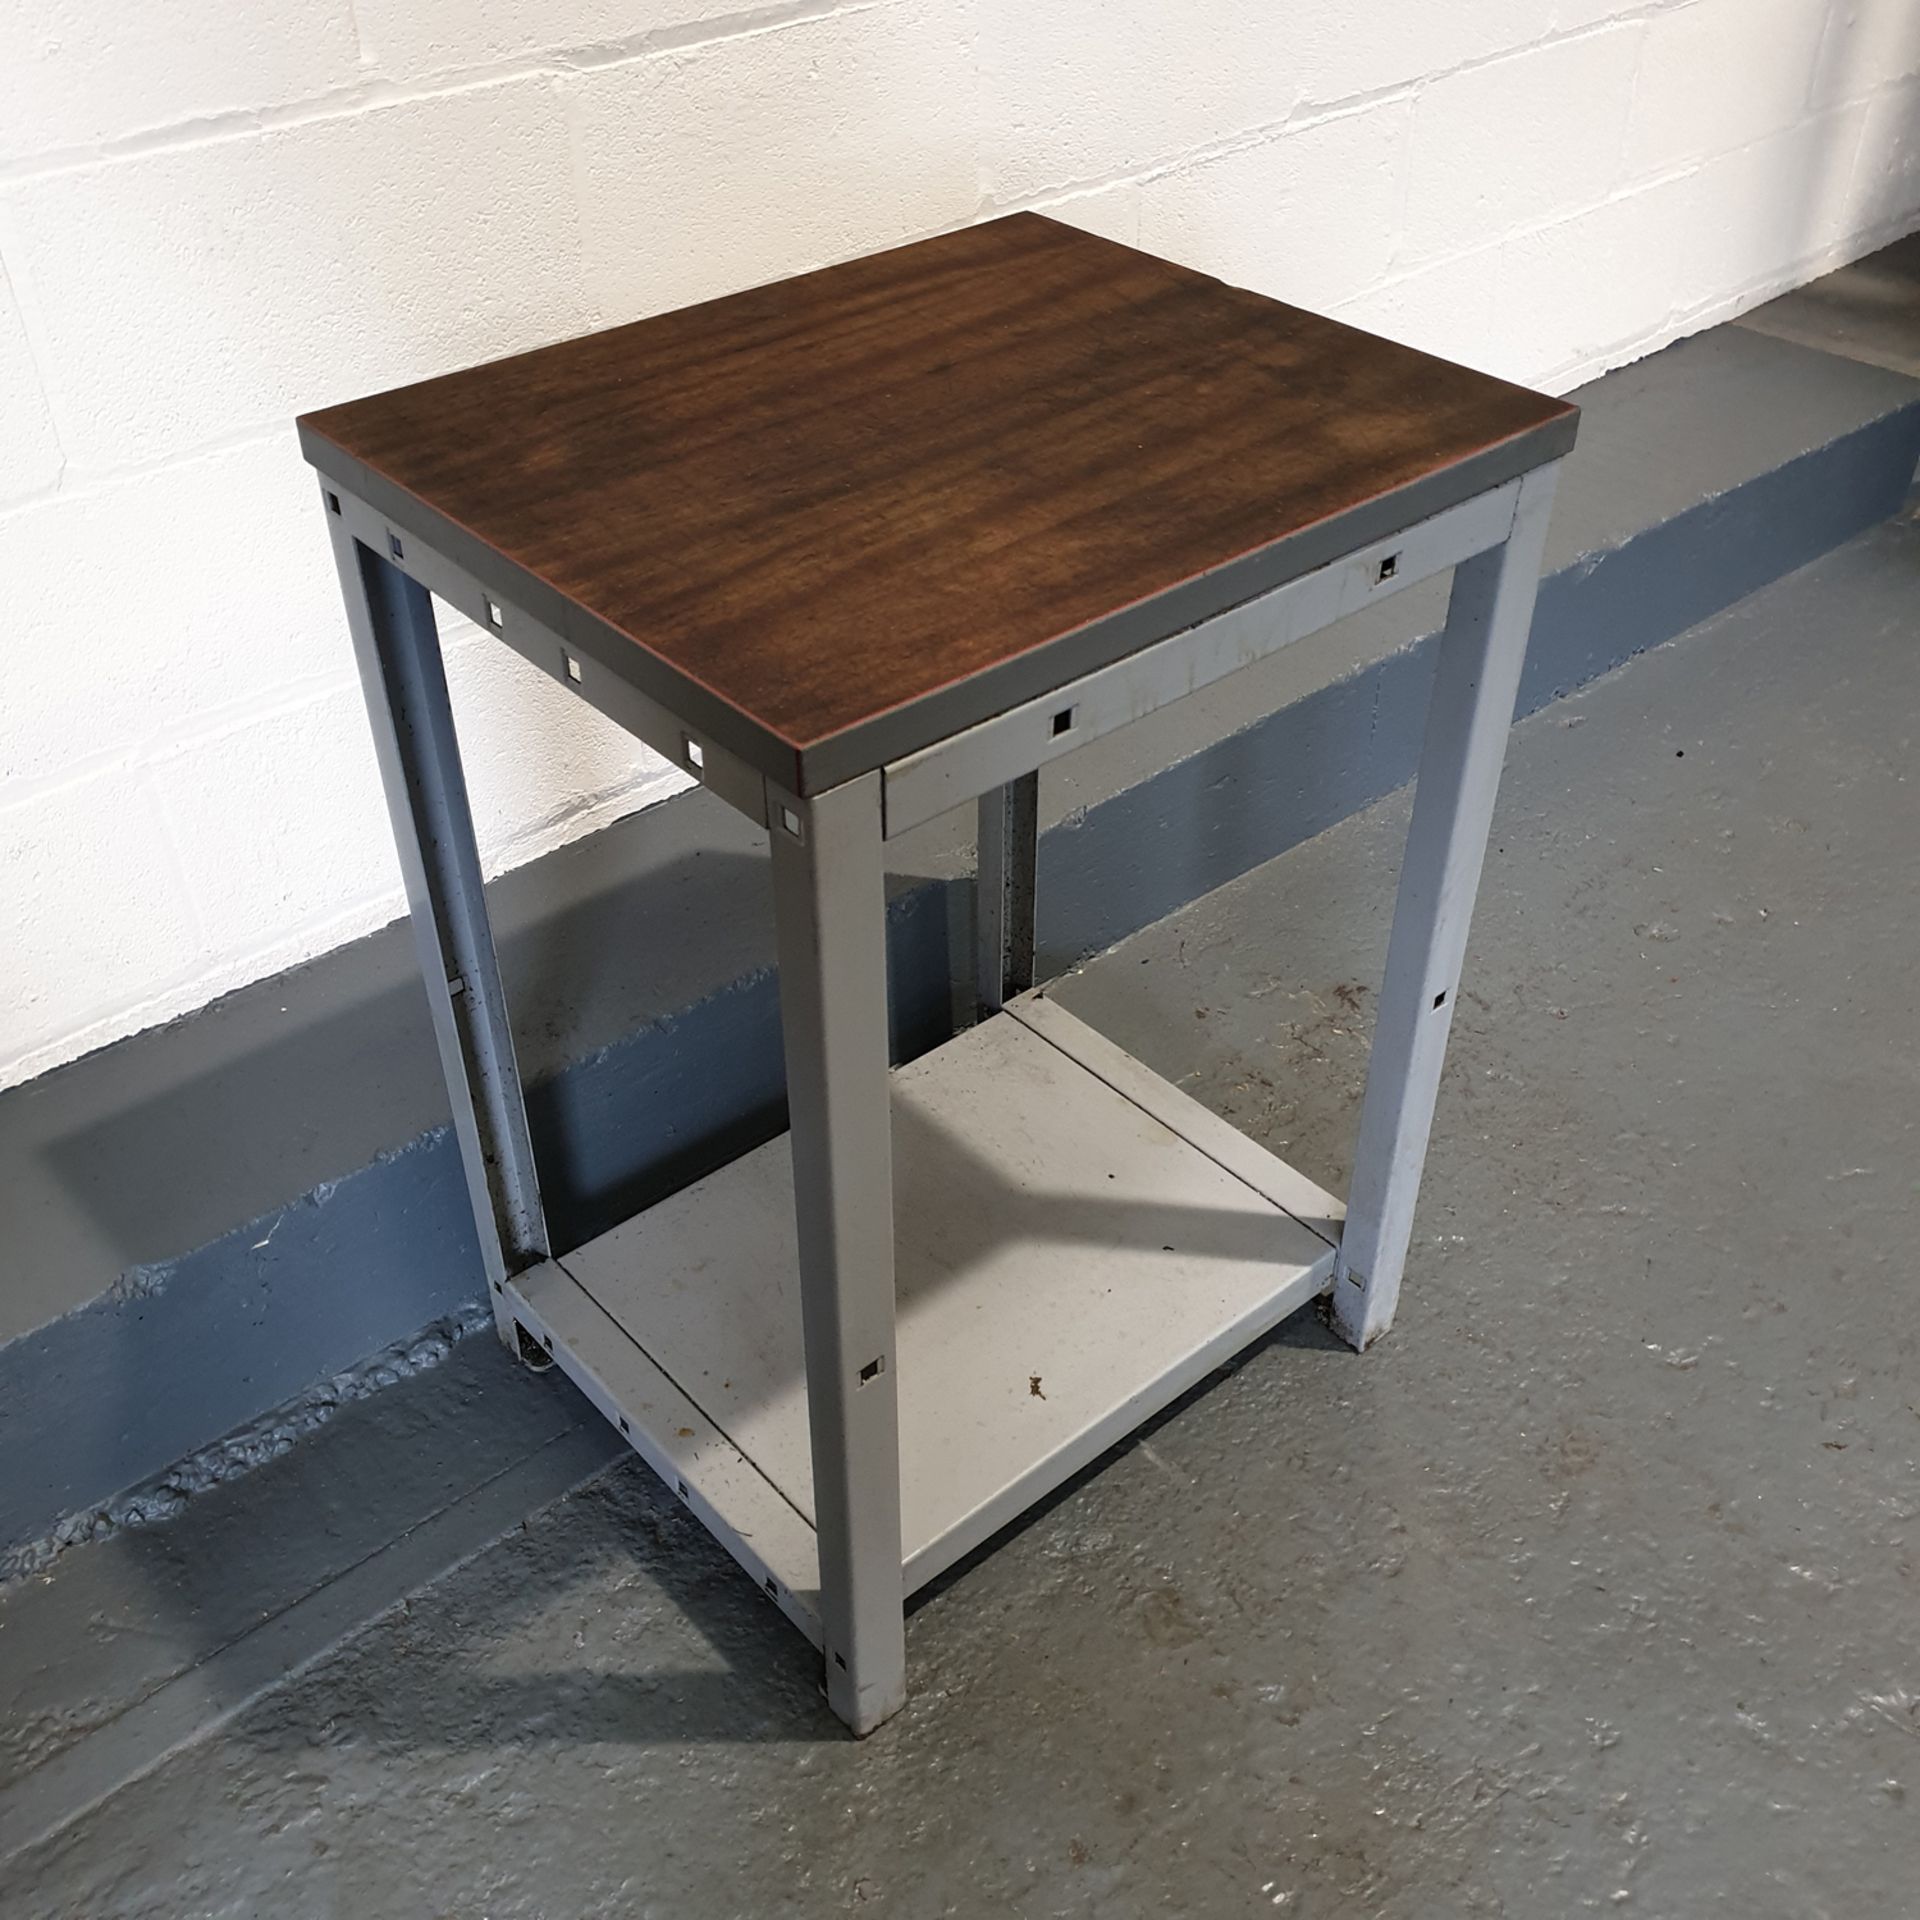 Steel Table with wood Surface. Approx Dimensions 600mm x 500mm x 830mm High. - Image 2 of 3